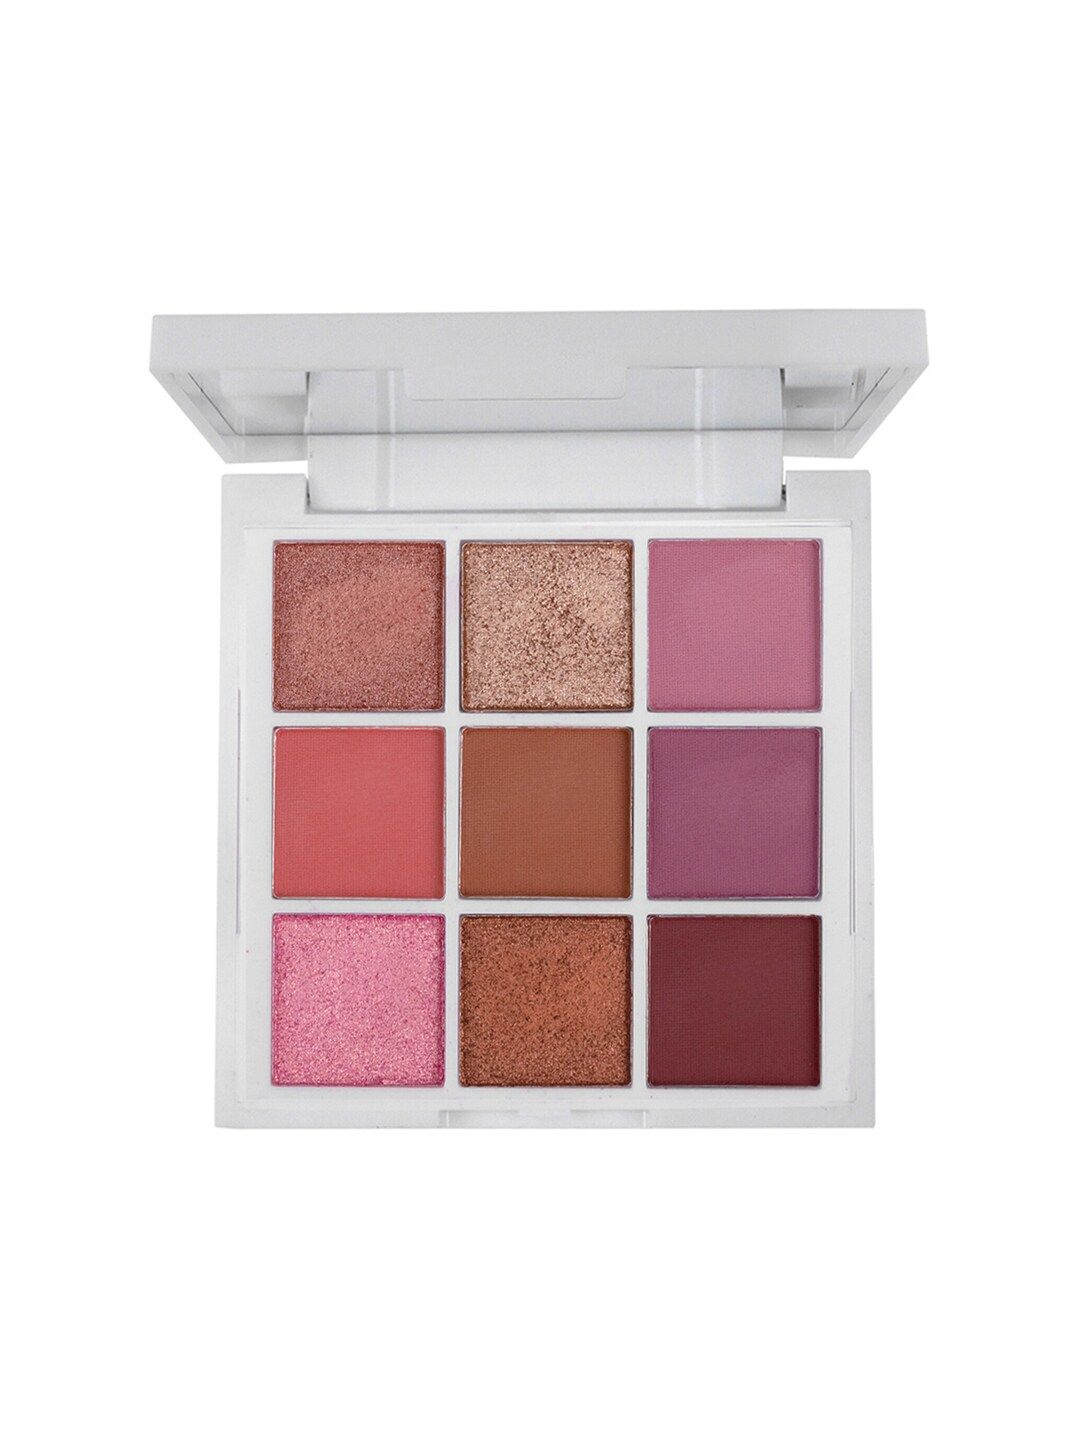 MARS I Belong in your Purse Eyeshadow Palette - Soft Glam Price in India